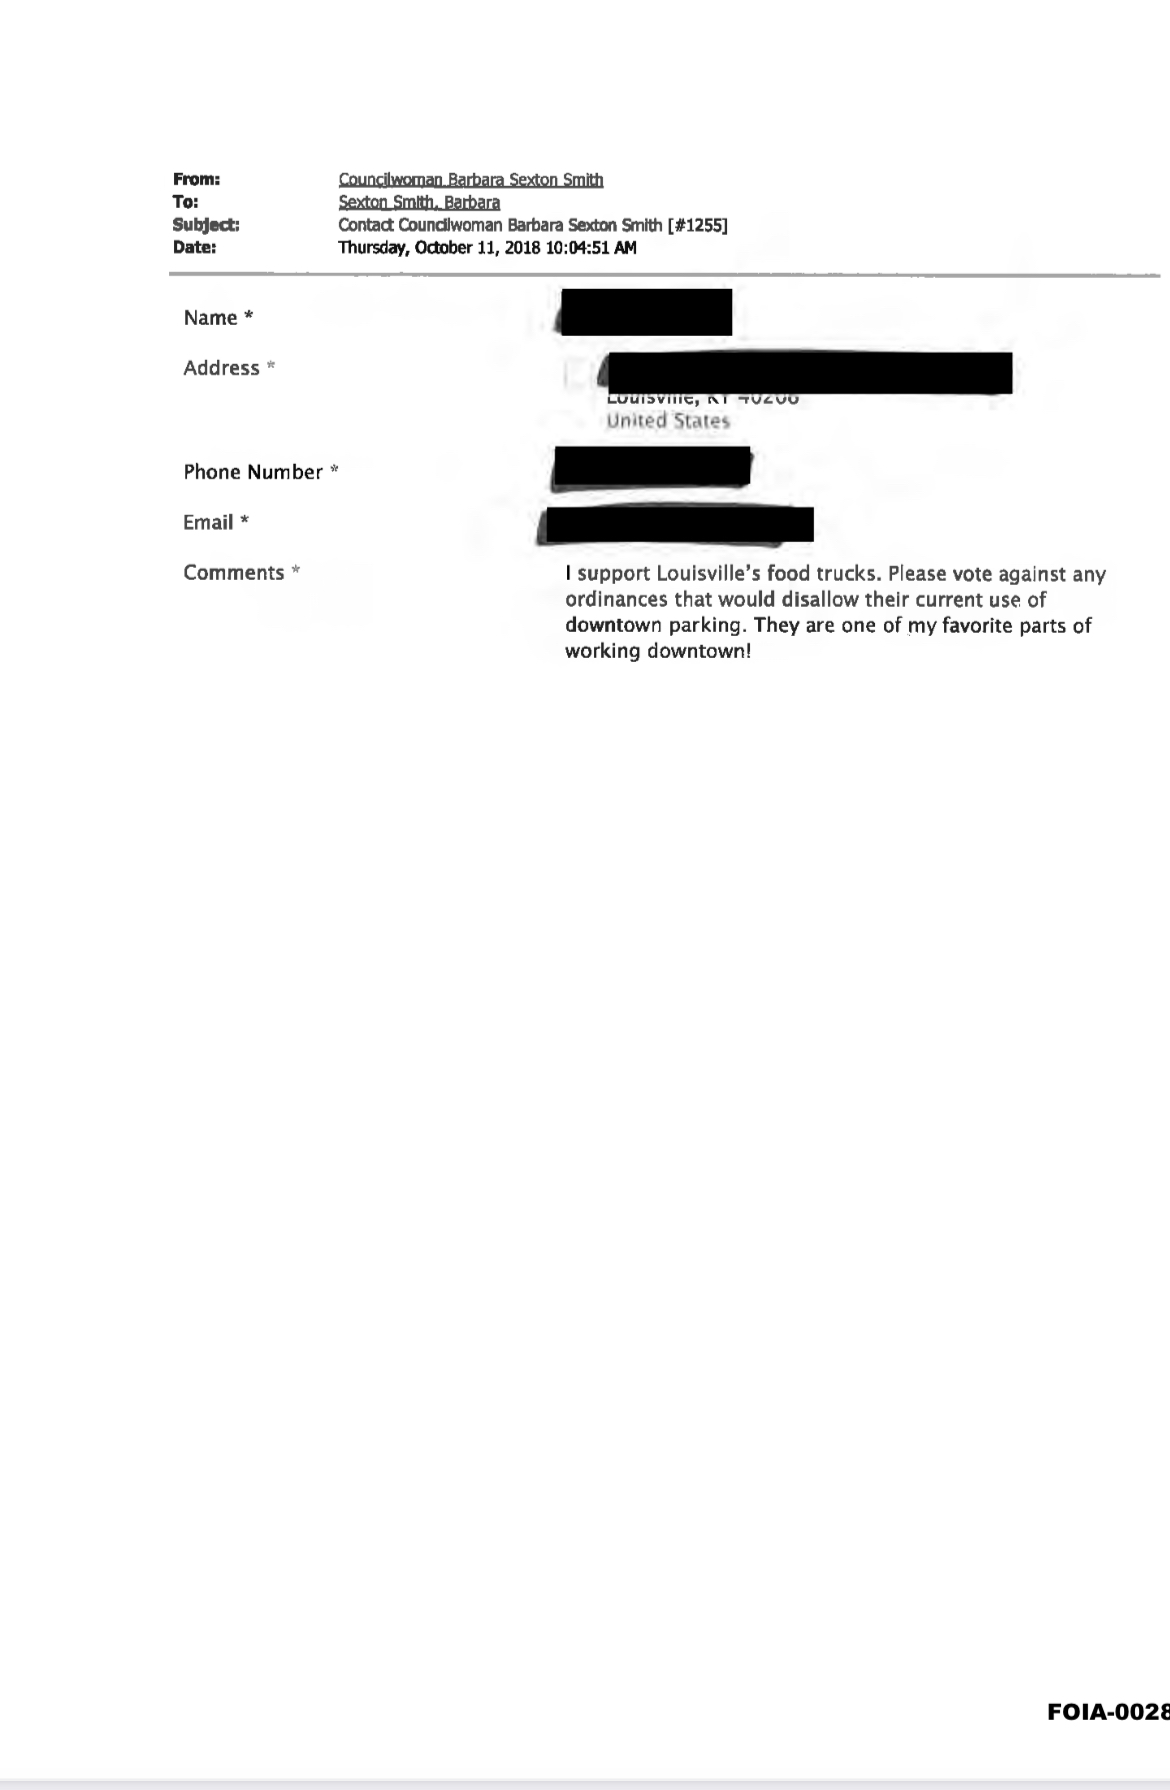 Redacted email obtained by Institute for Justicr